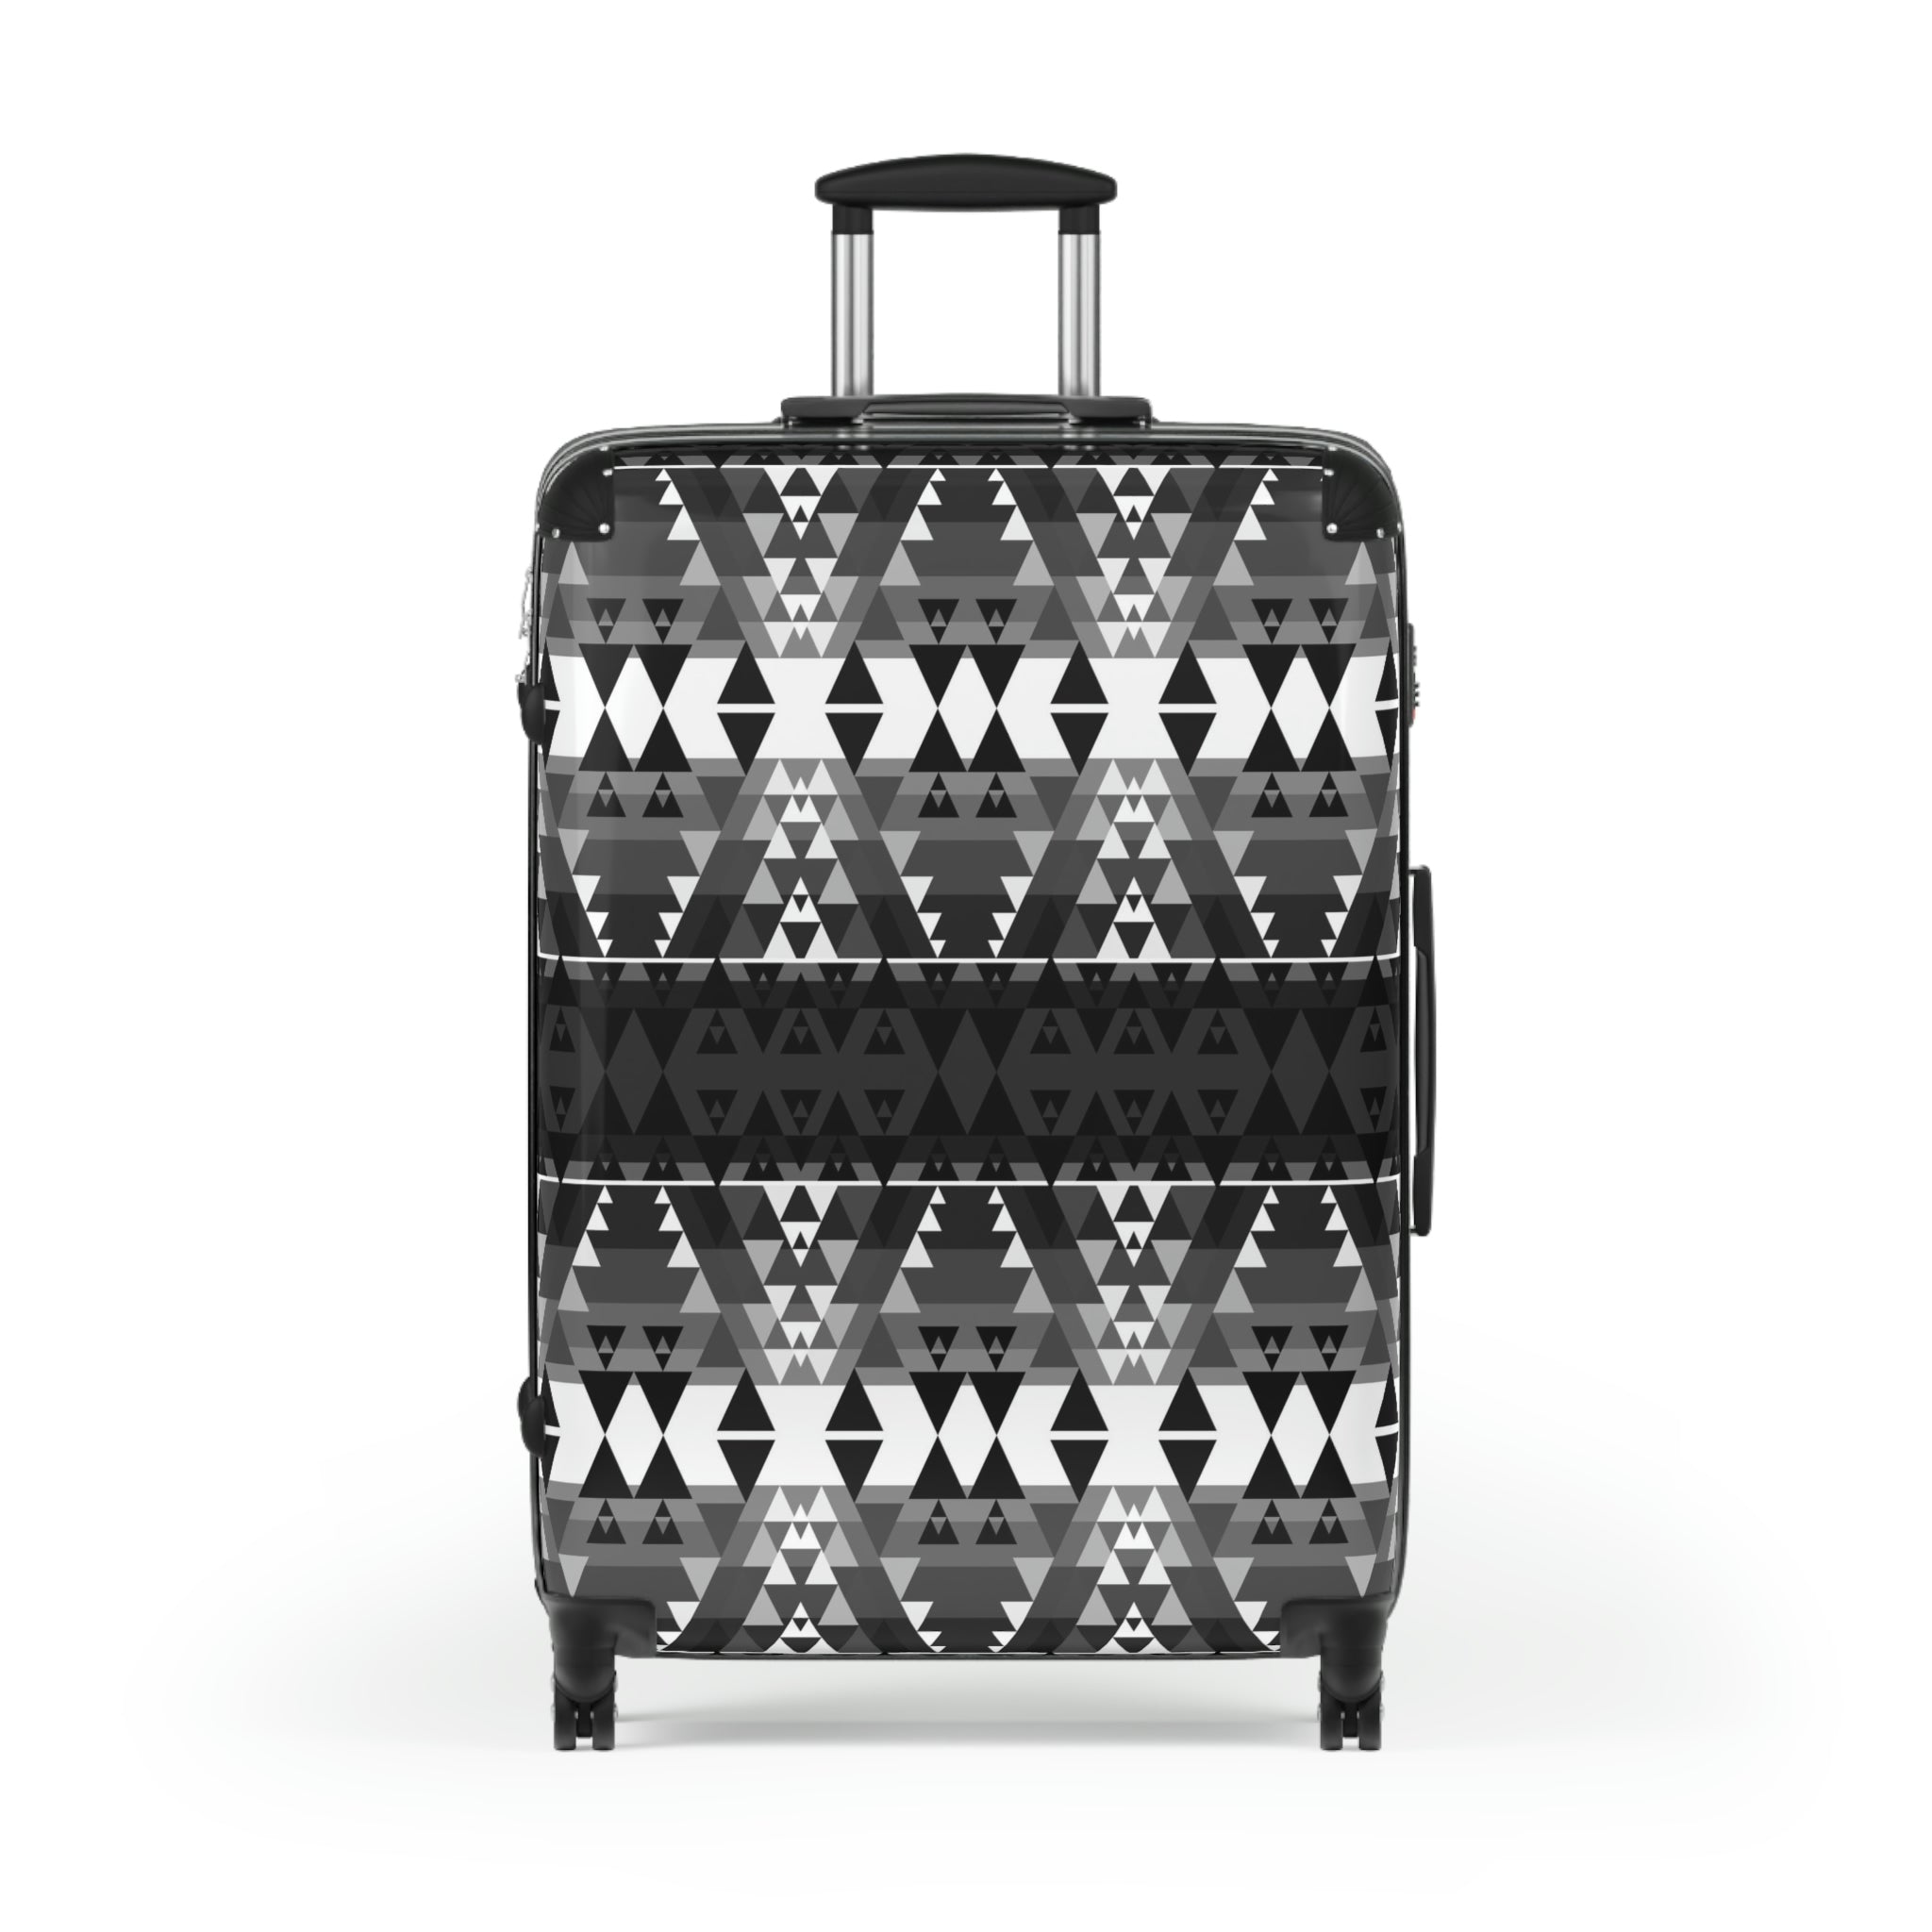 Writing on Stone Black and White Suitcases